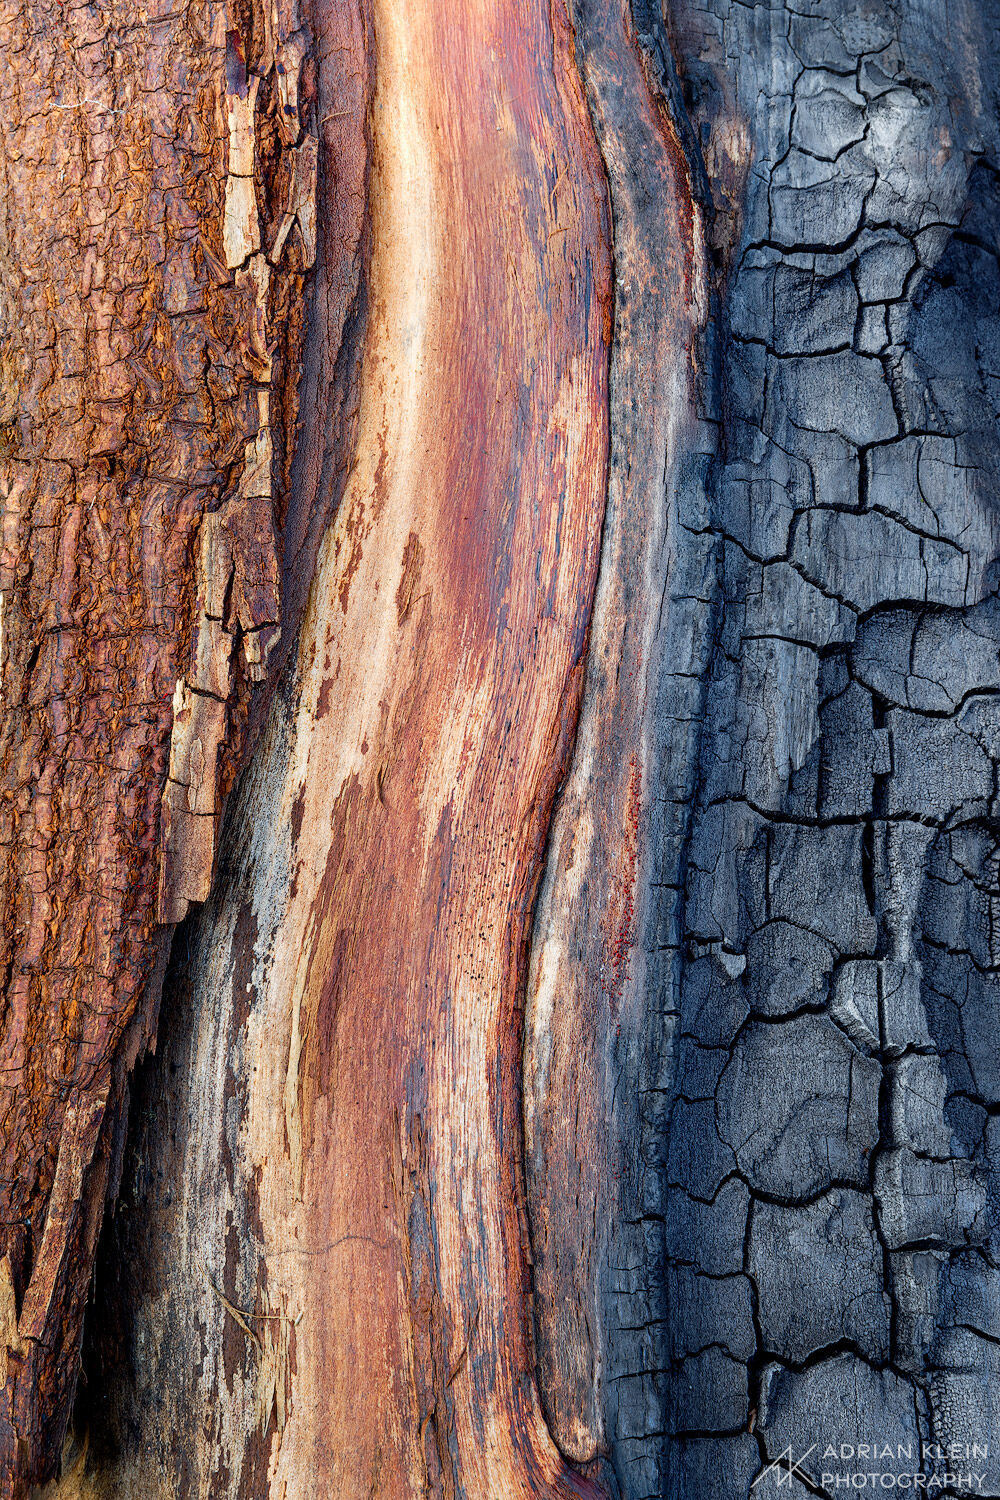 A large log from a burned tree showing three distinct layers. Columbia River Gorge, Oregon. Limited Edition of 50.